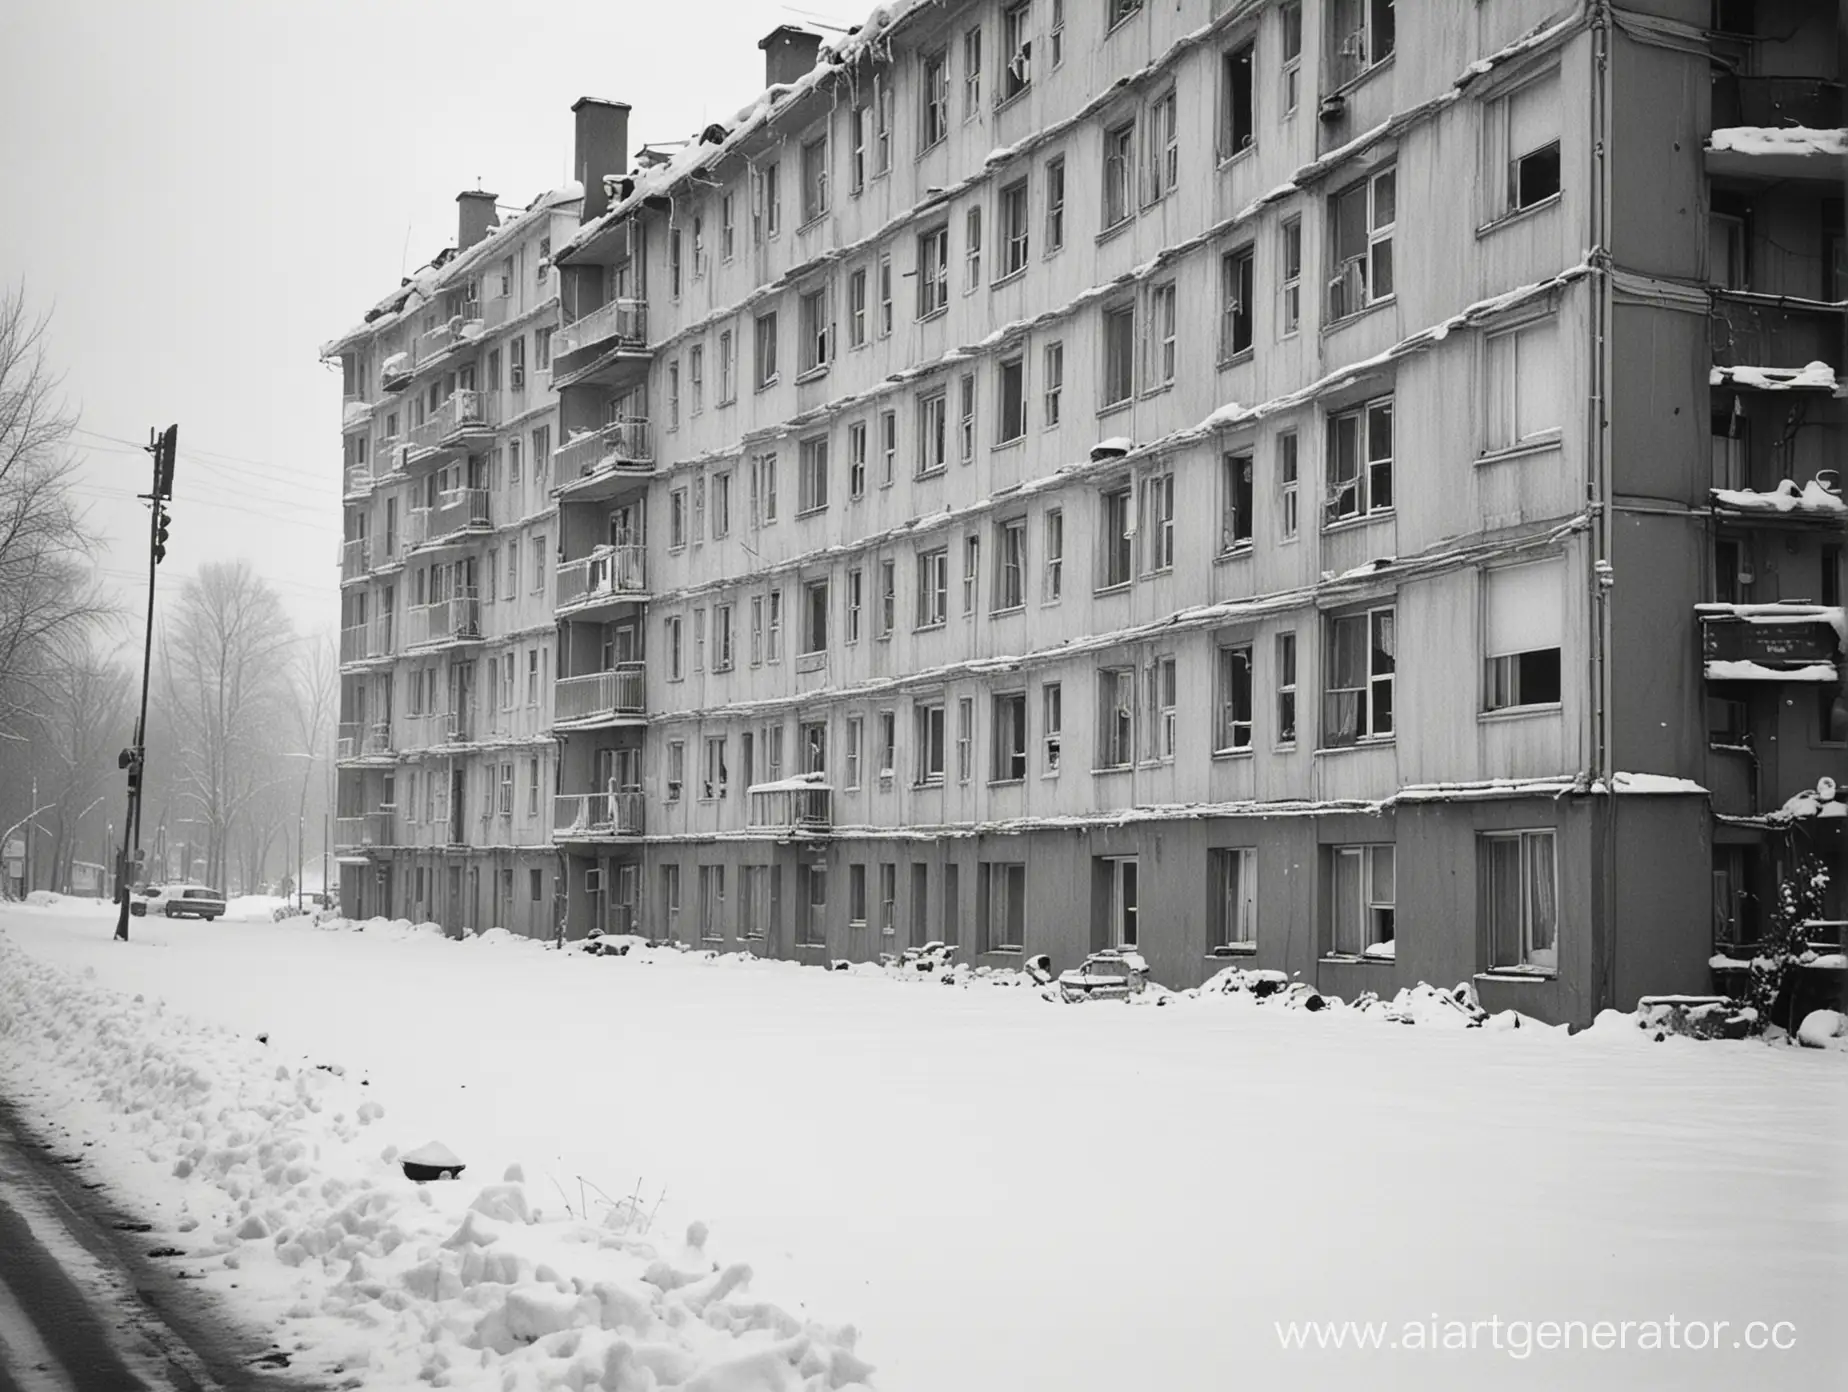 Desolate-Russian-Town-Abandoned-Block-of-Flats-Amidst-Snowy-Wilderness